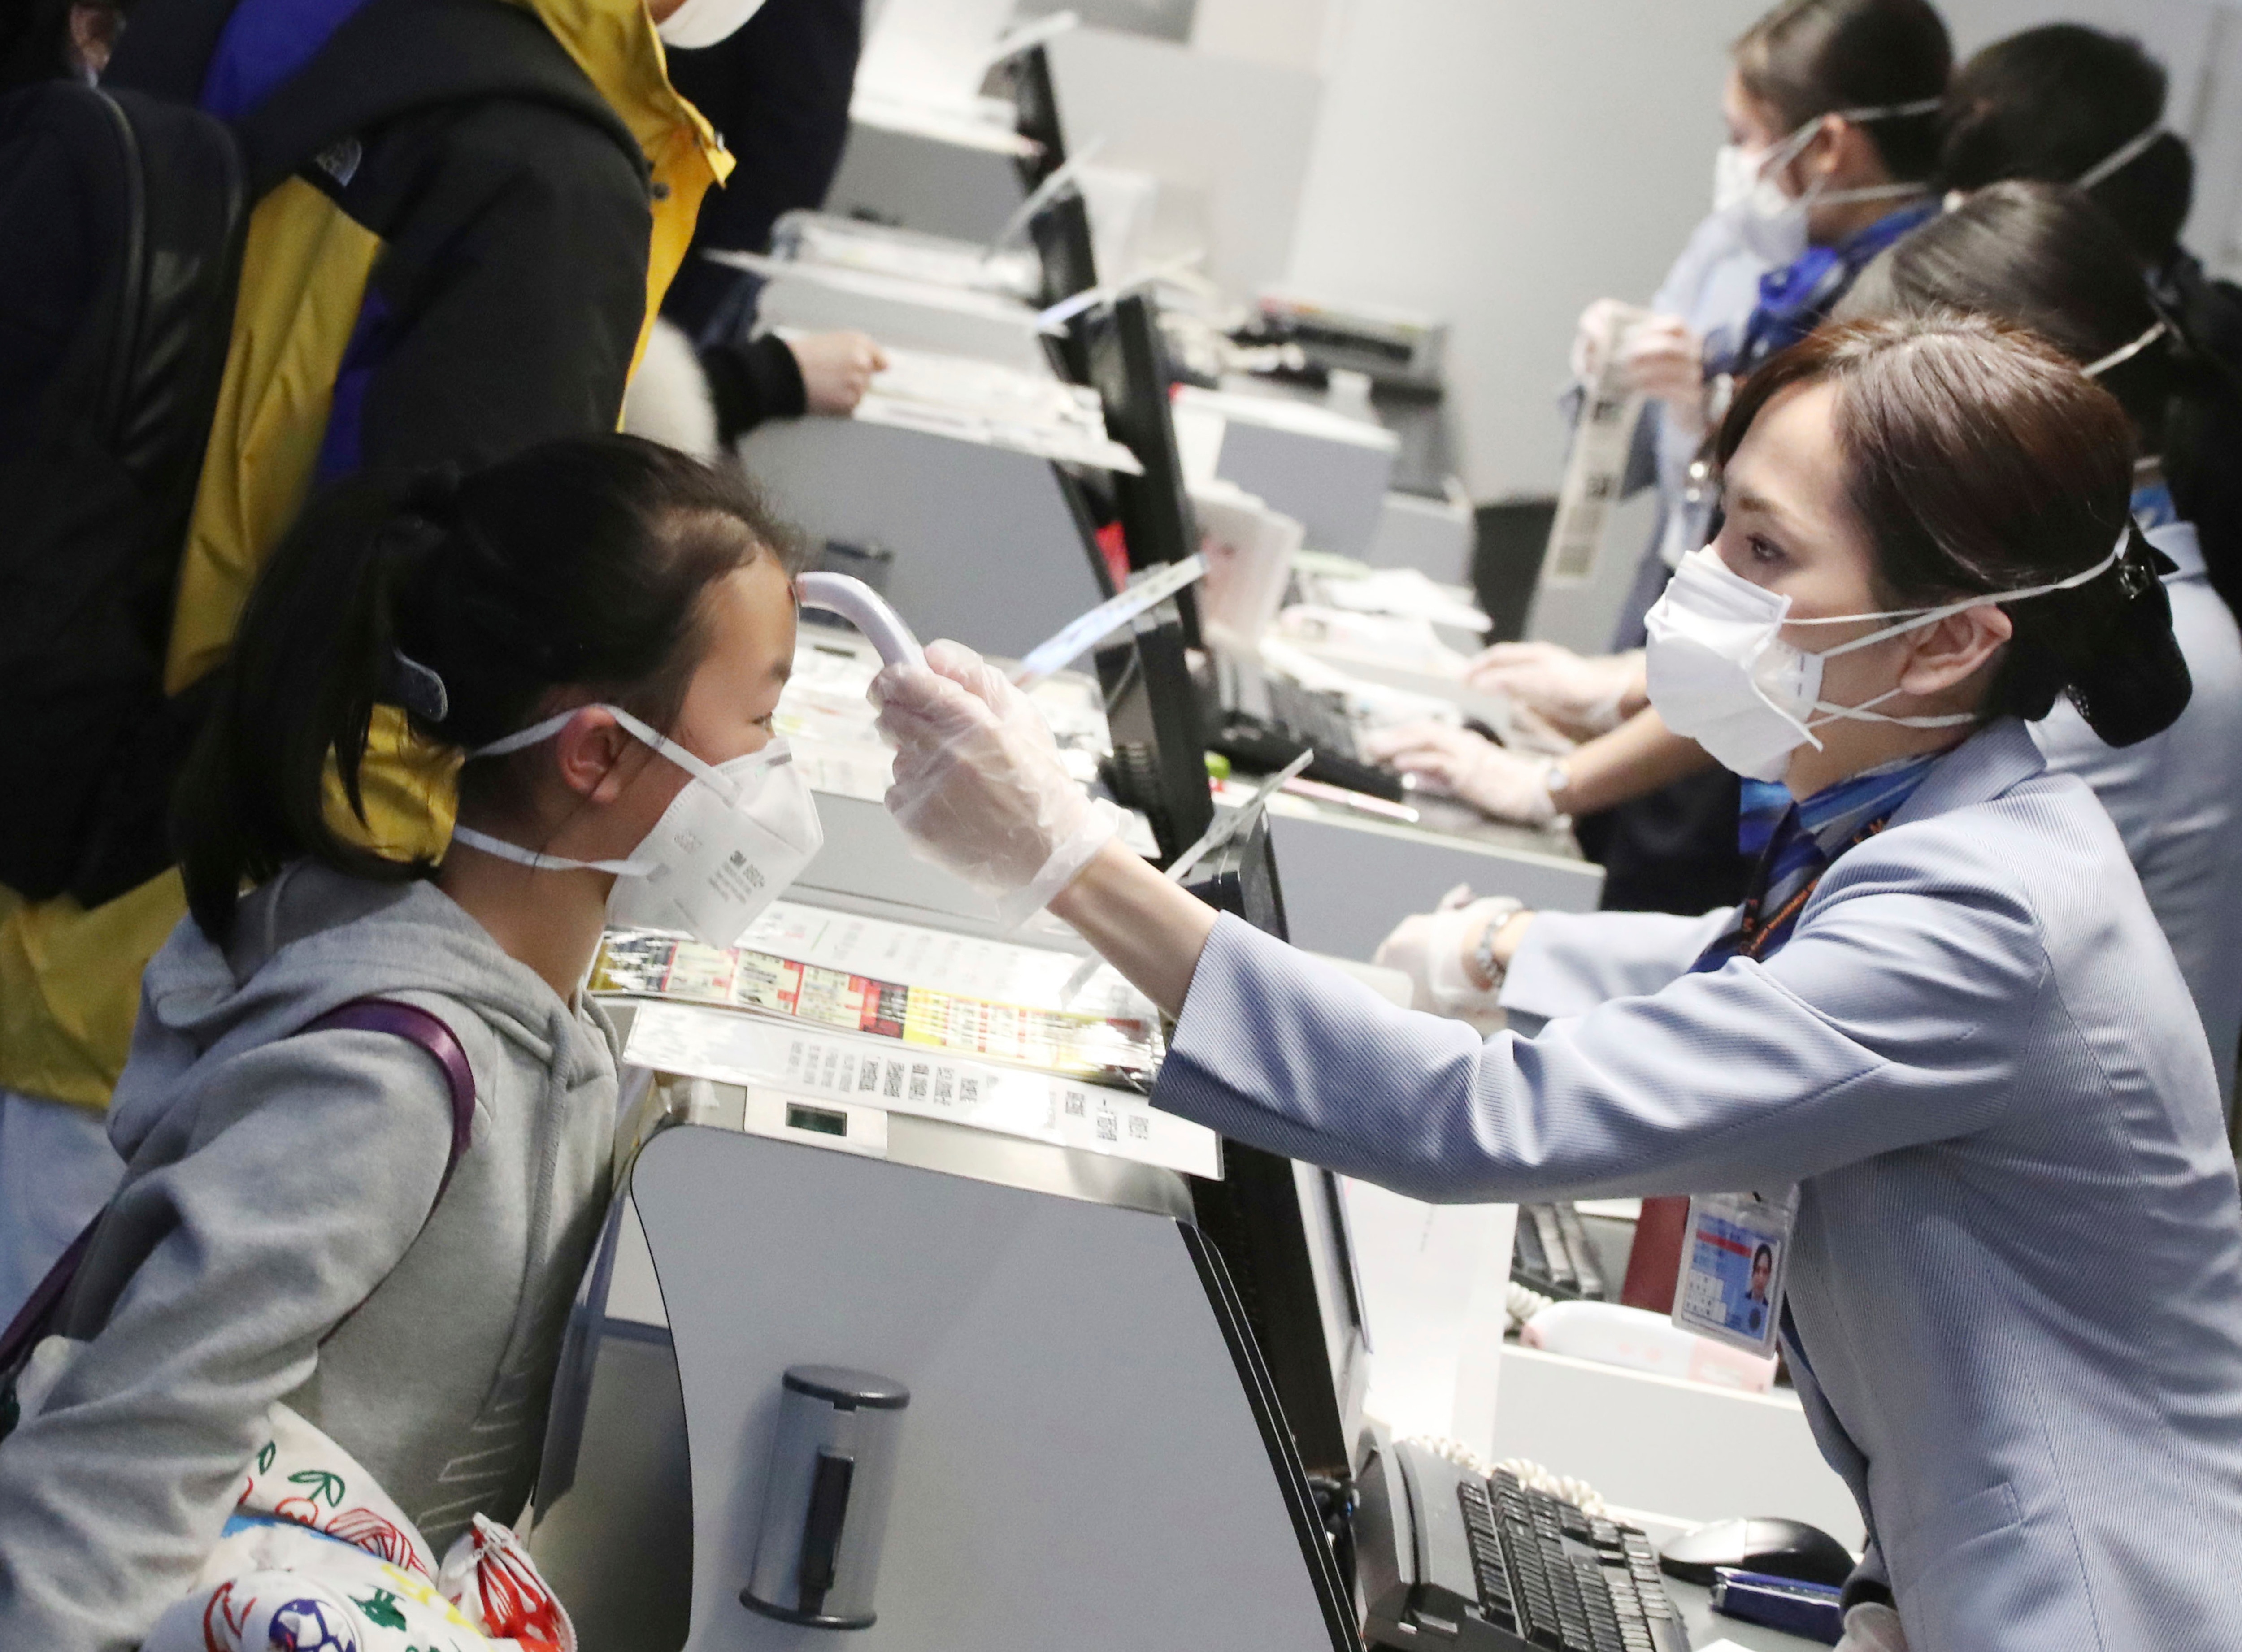 Passengers have their body temperature assessed by check-in staff ahead of a flight from Tokyo to the coronavirus epicentre of Wuhan, China.